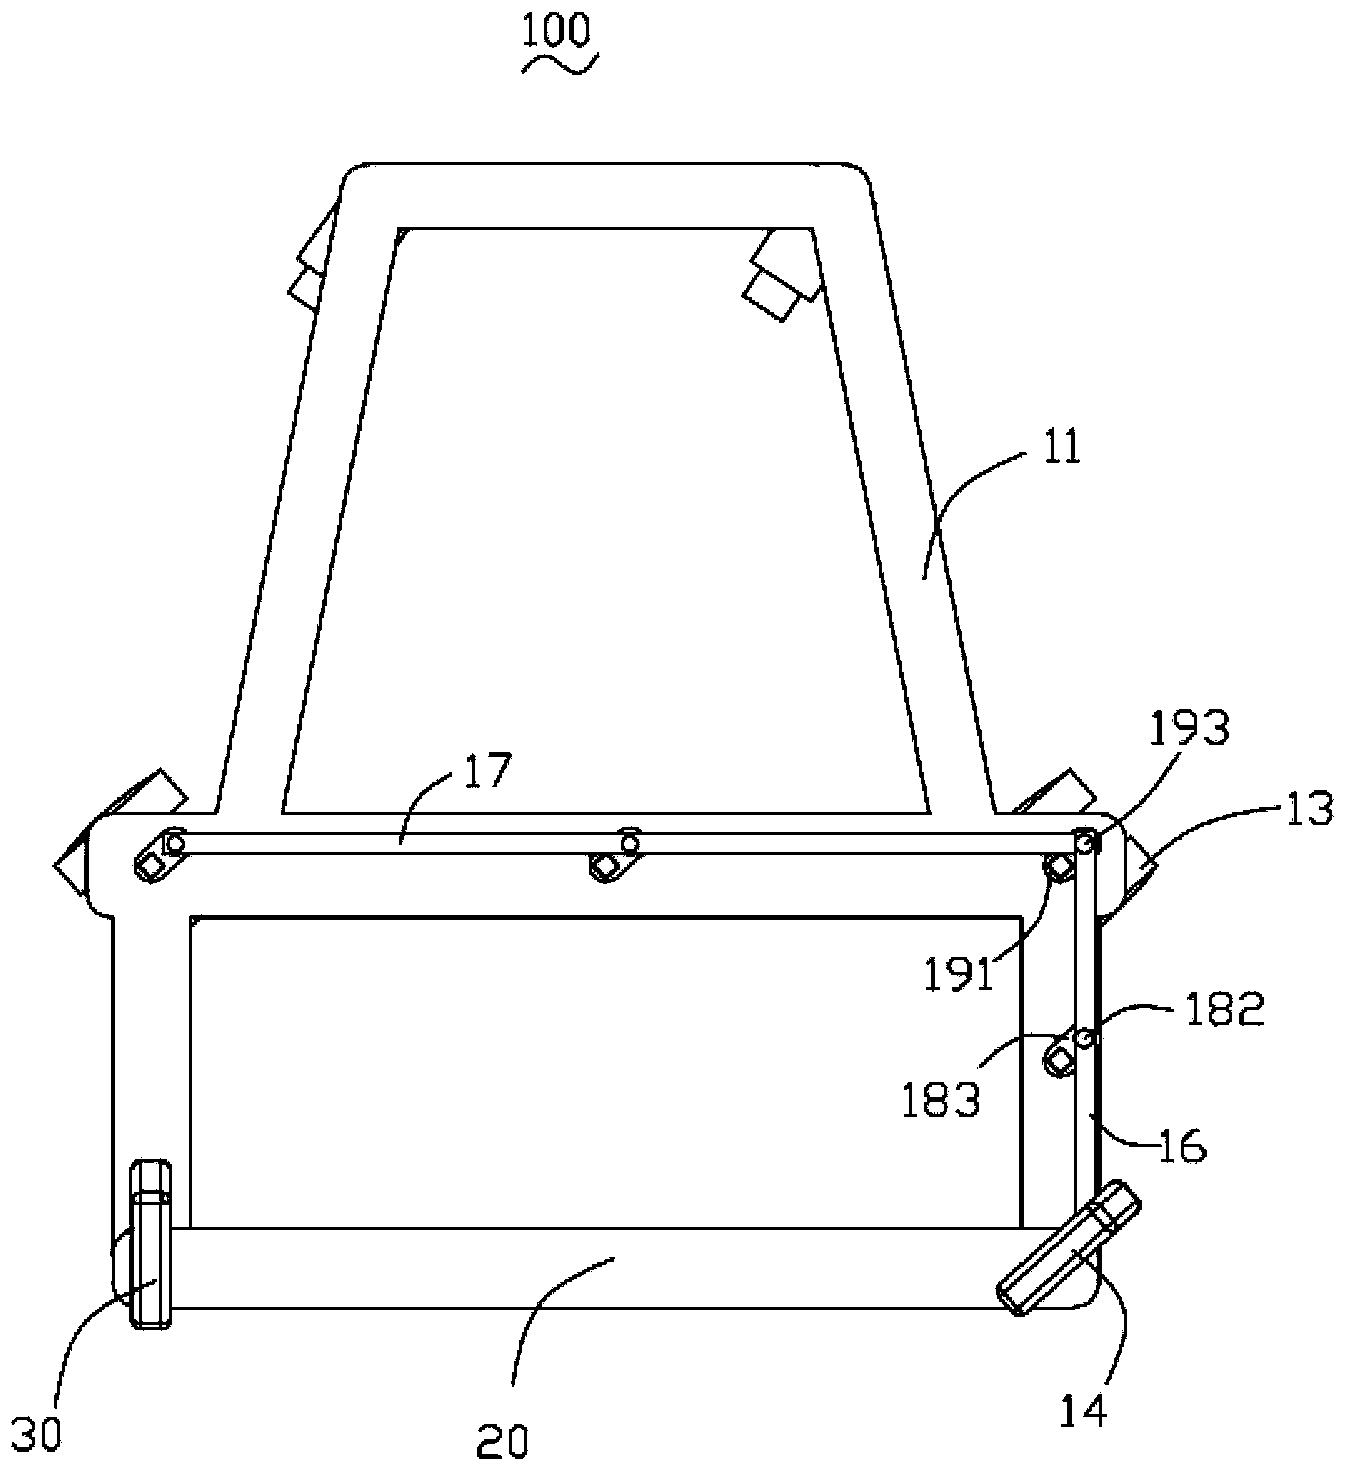 Steering mechanism, omnidirectional traveling chassis and trolley